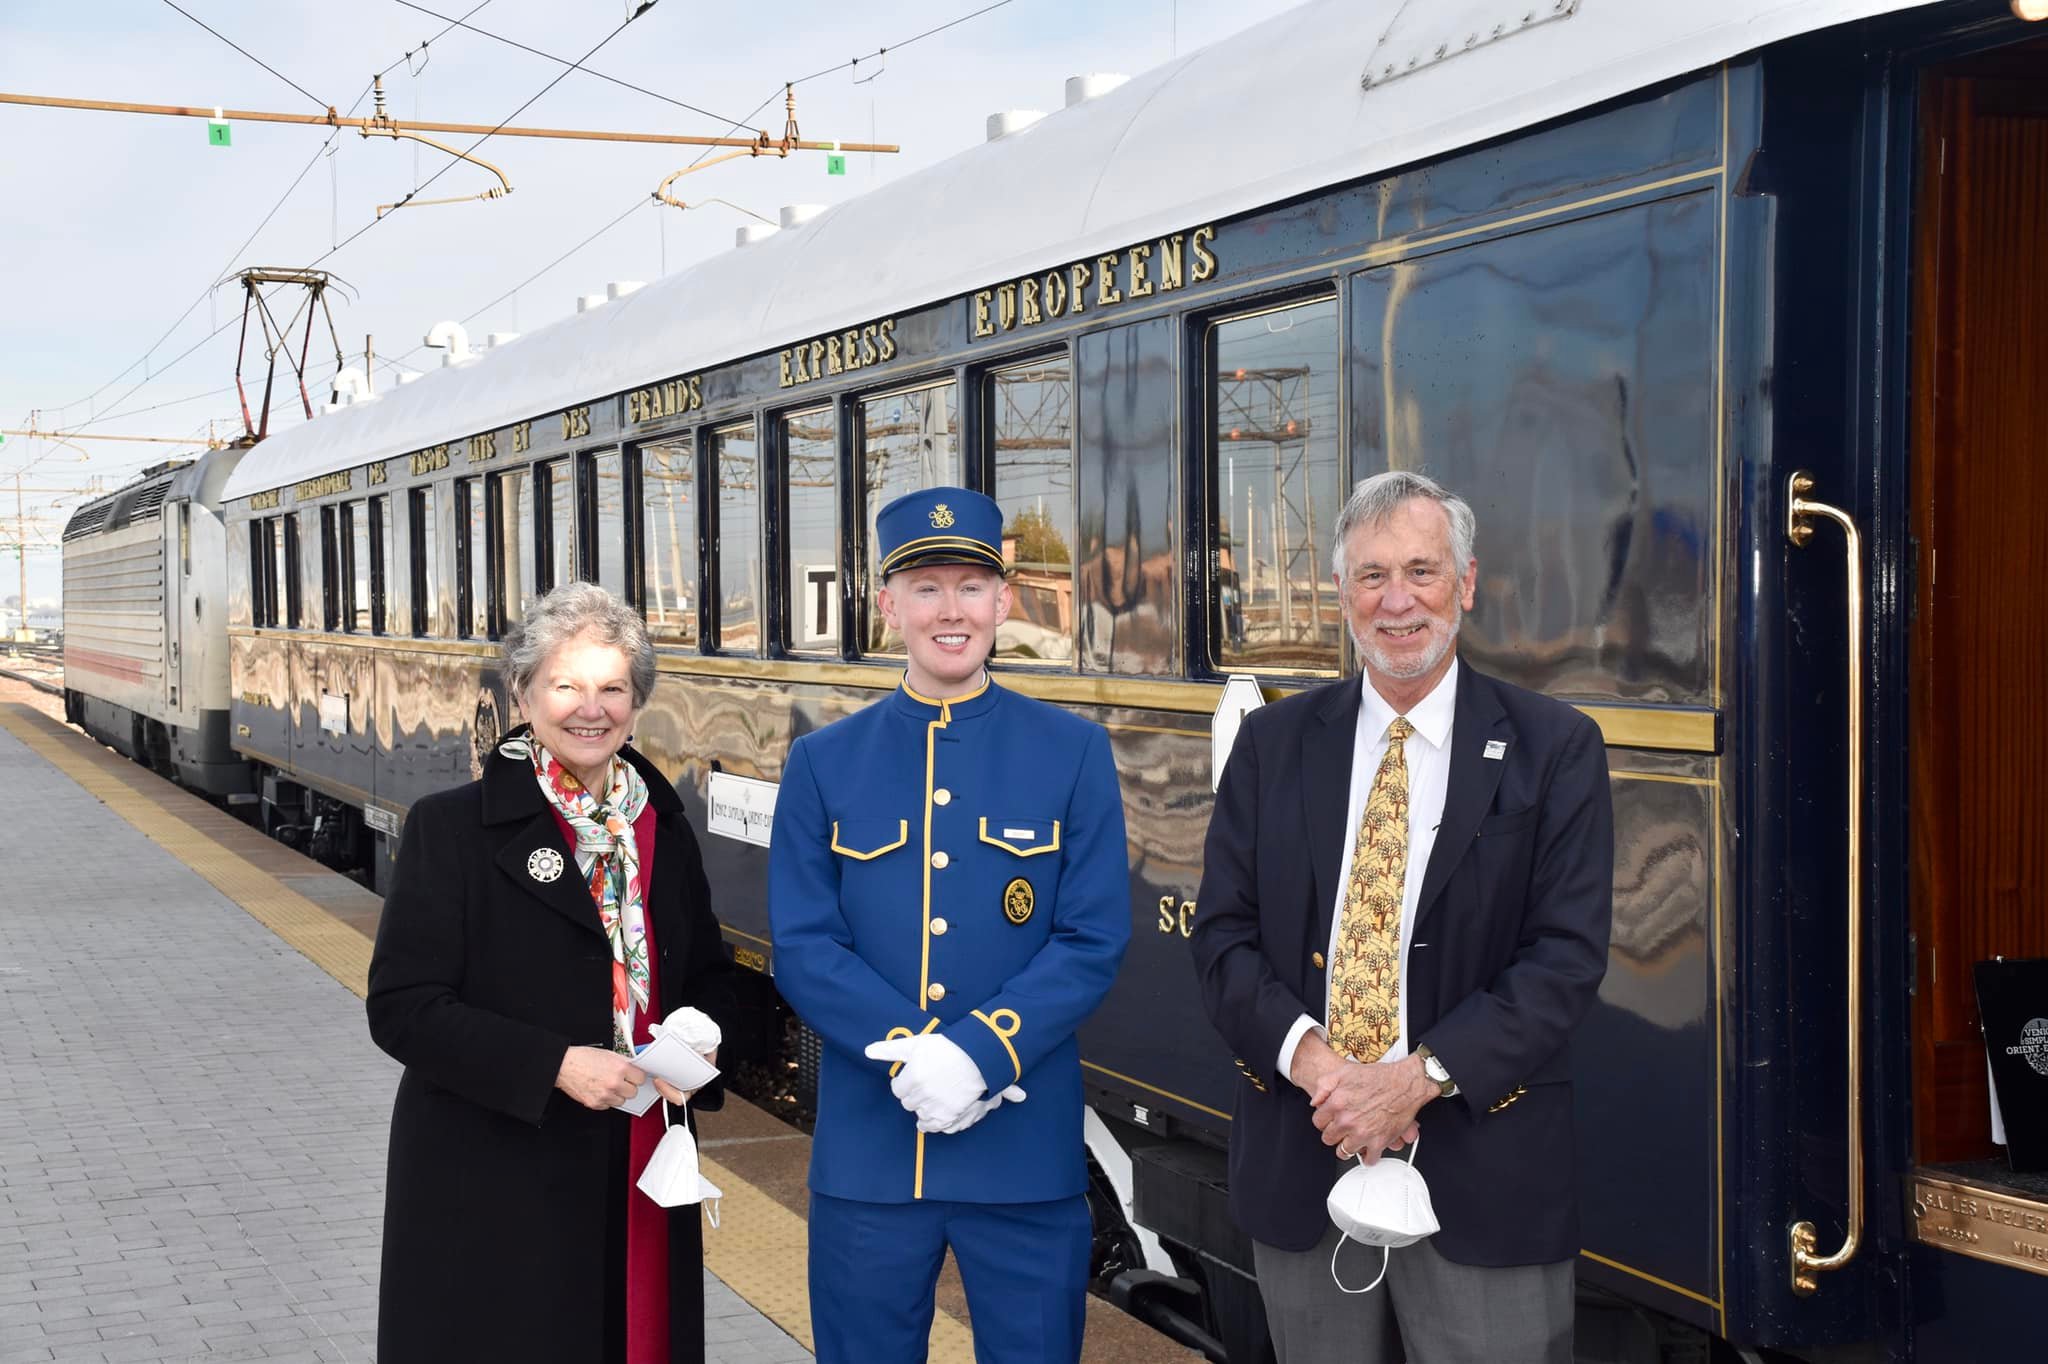 Grand Dames of the Rails: VSOE's Grand Suites Offer Privacy